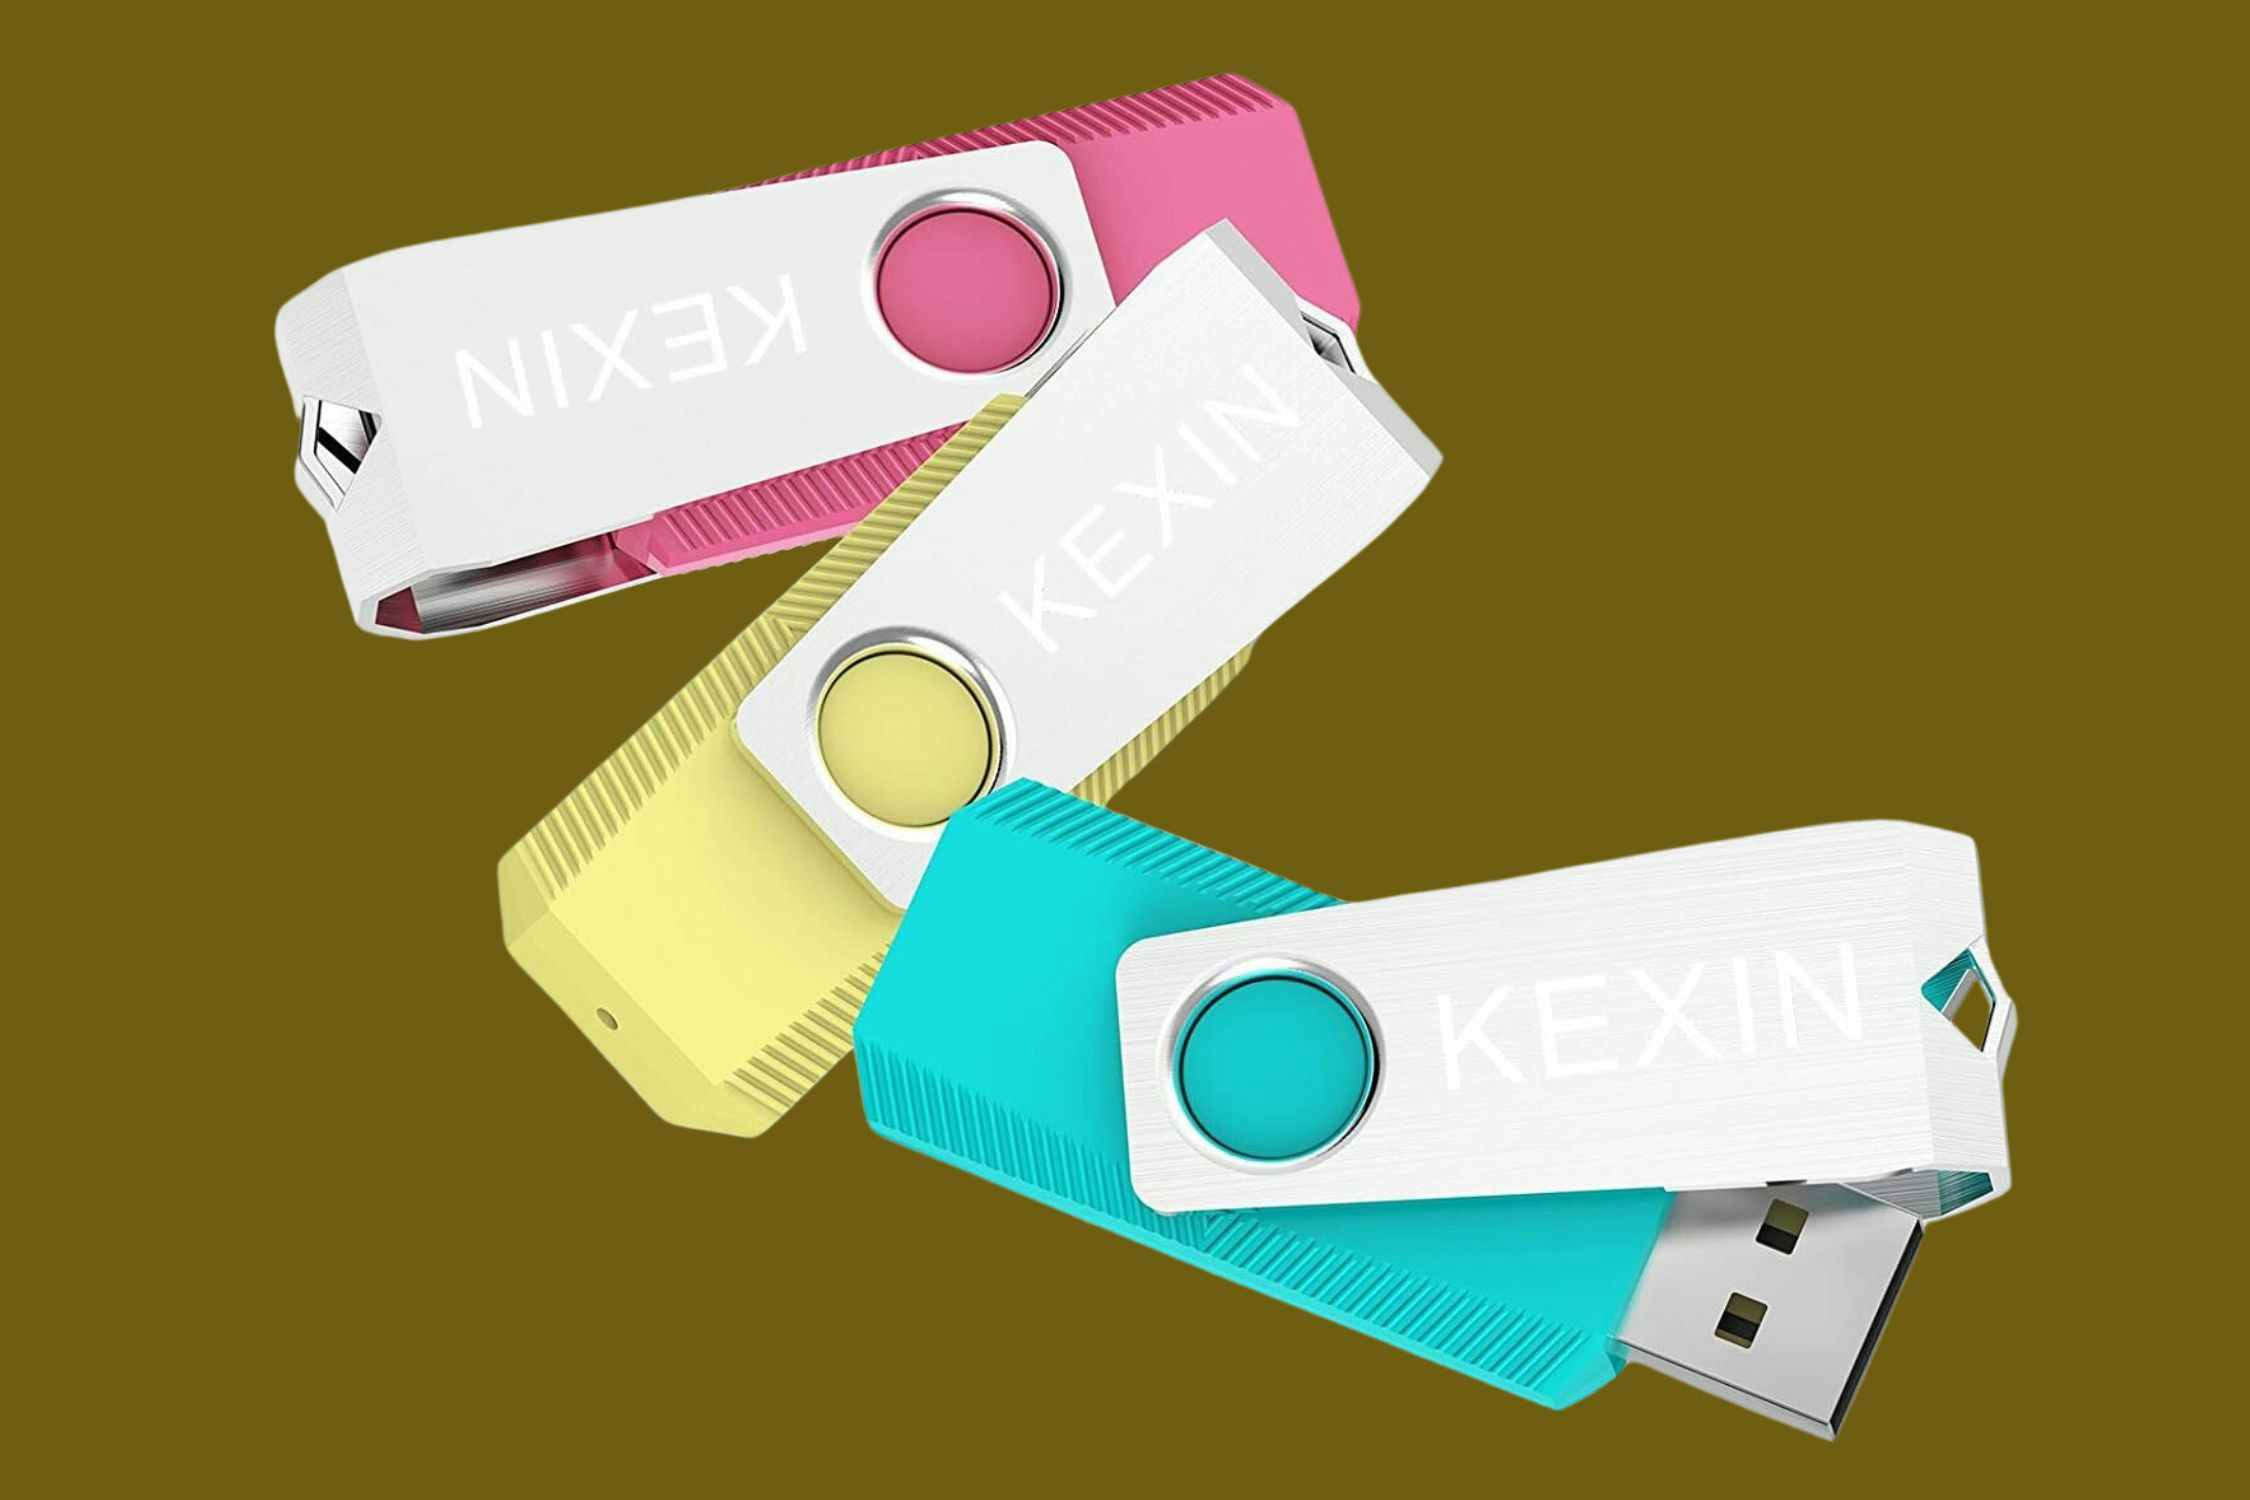 Get 3 USB Flash Drives for Just $9 on Amazon